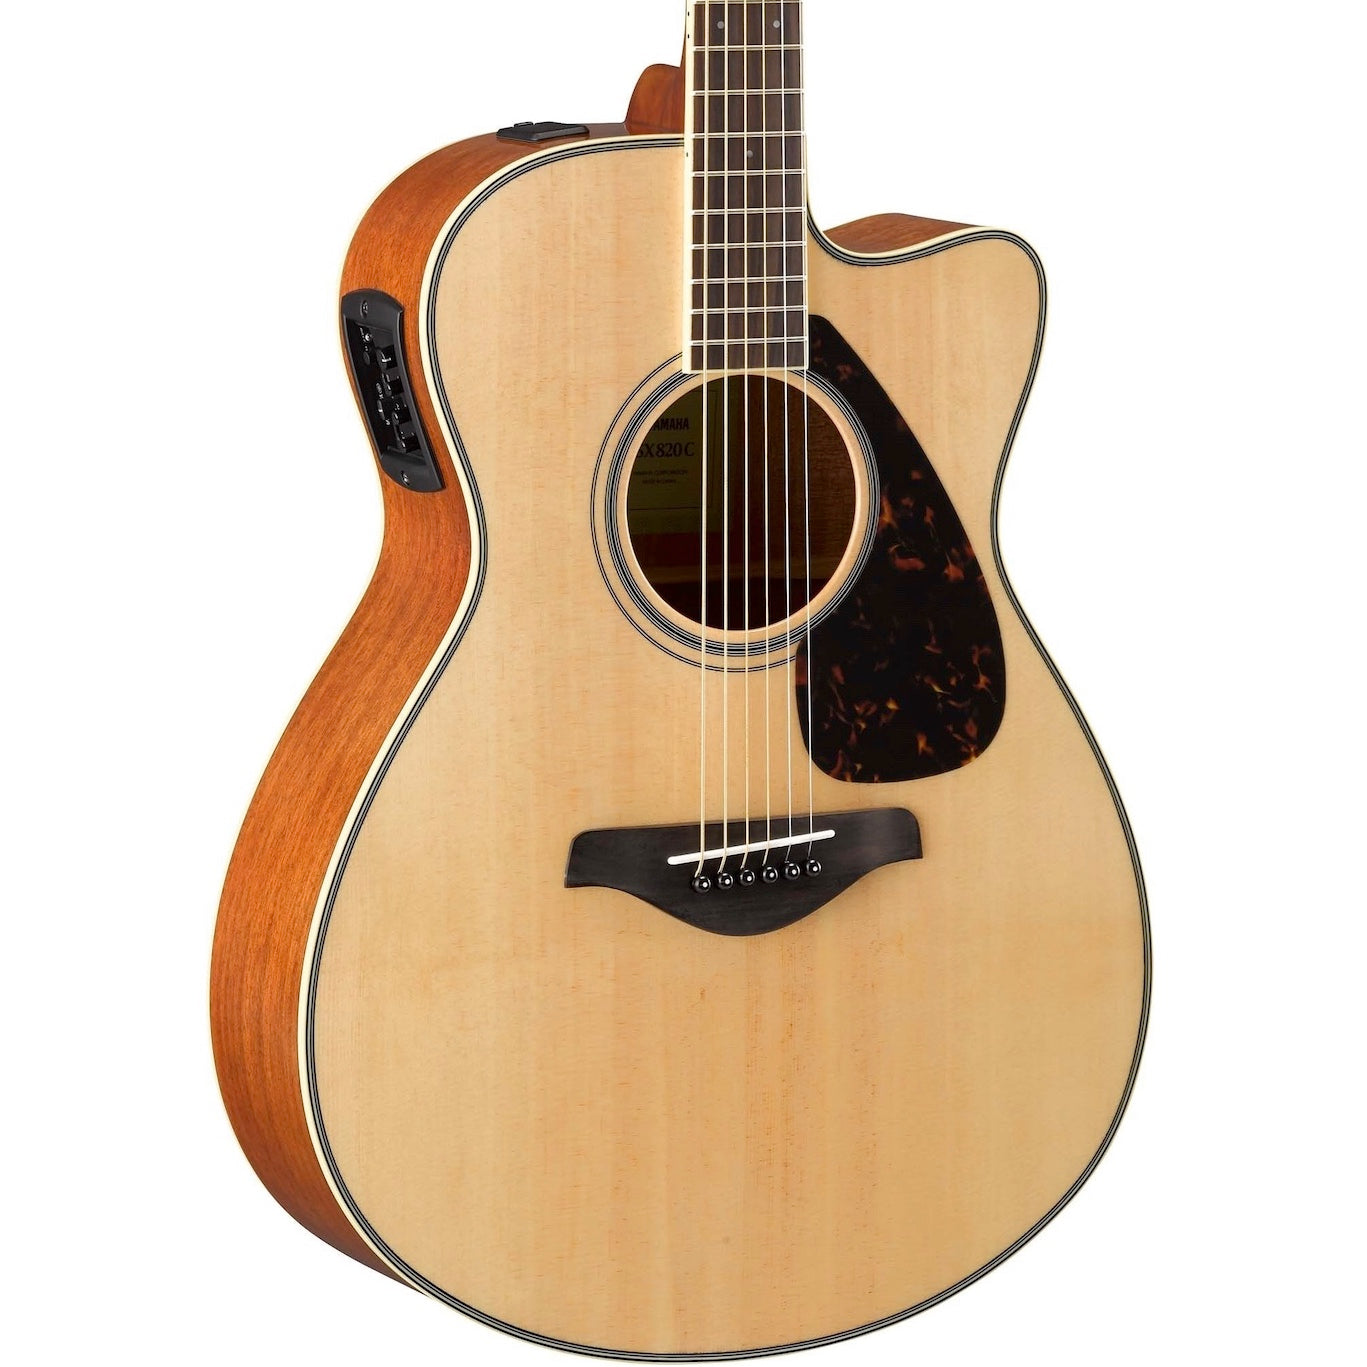 Yamaha FSX820C Concert Natural | Music Experience | Shop Online | South Africa